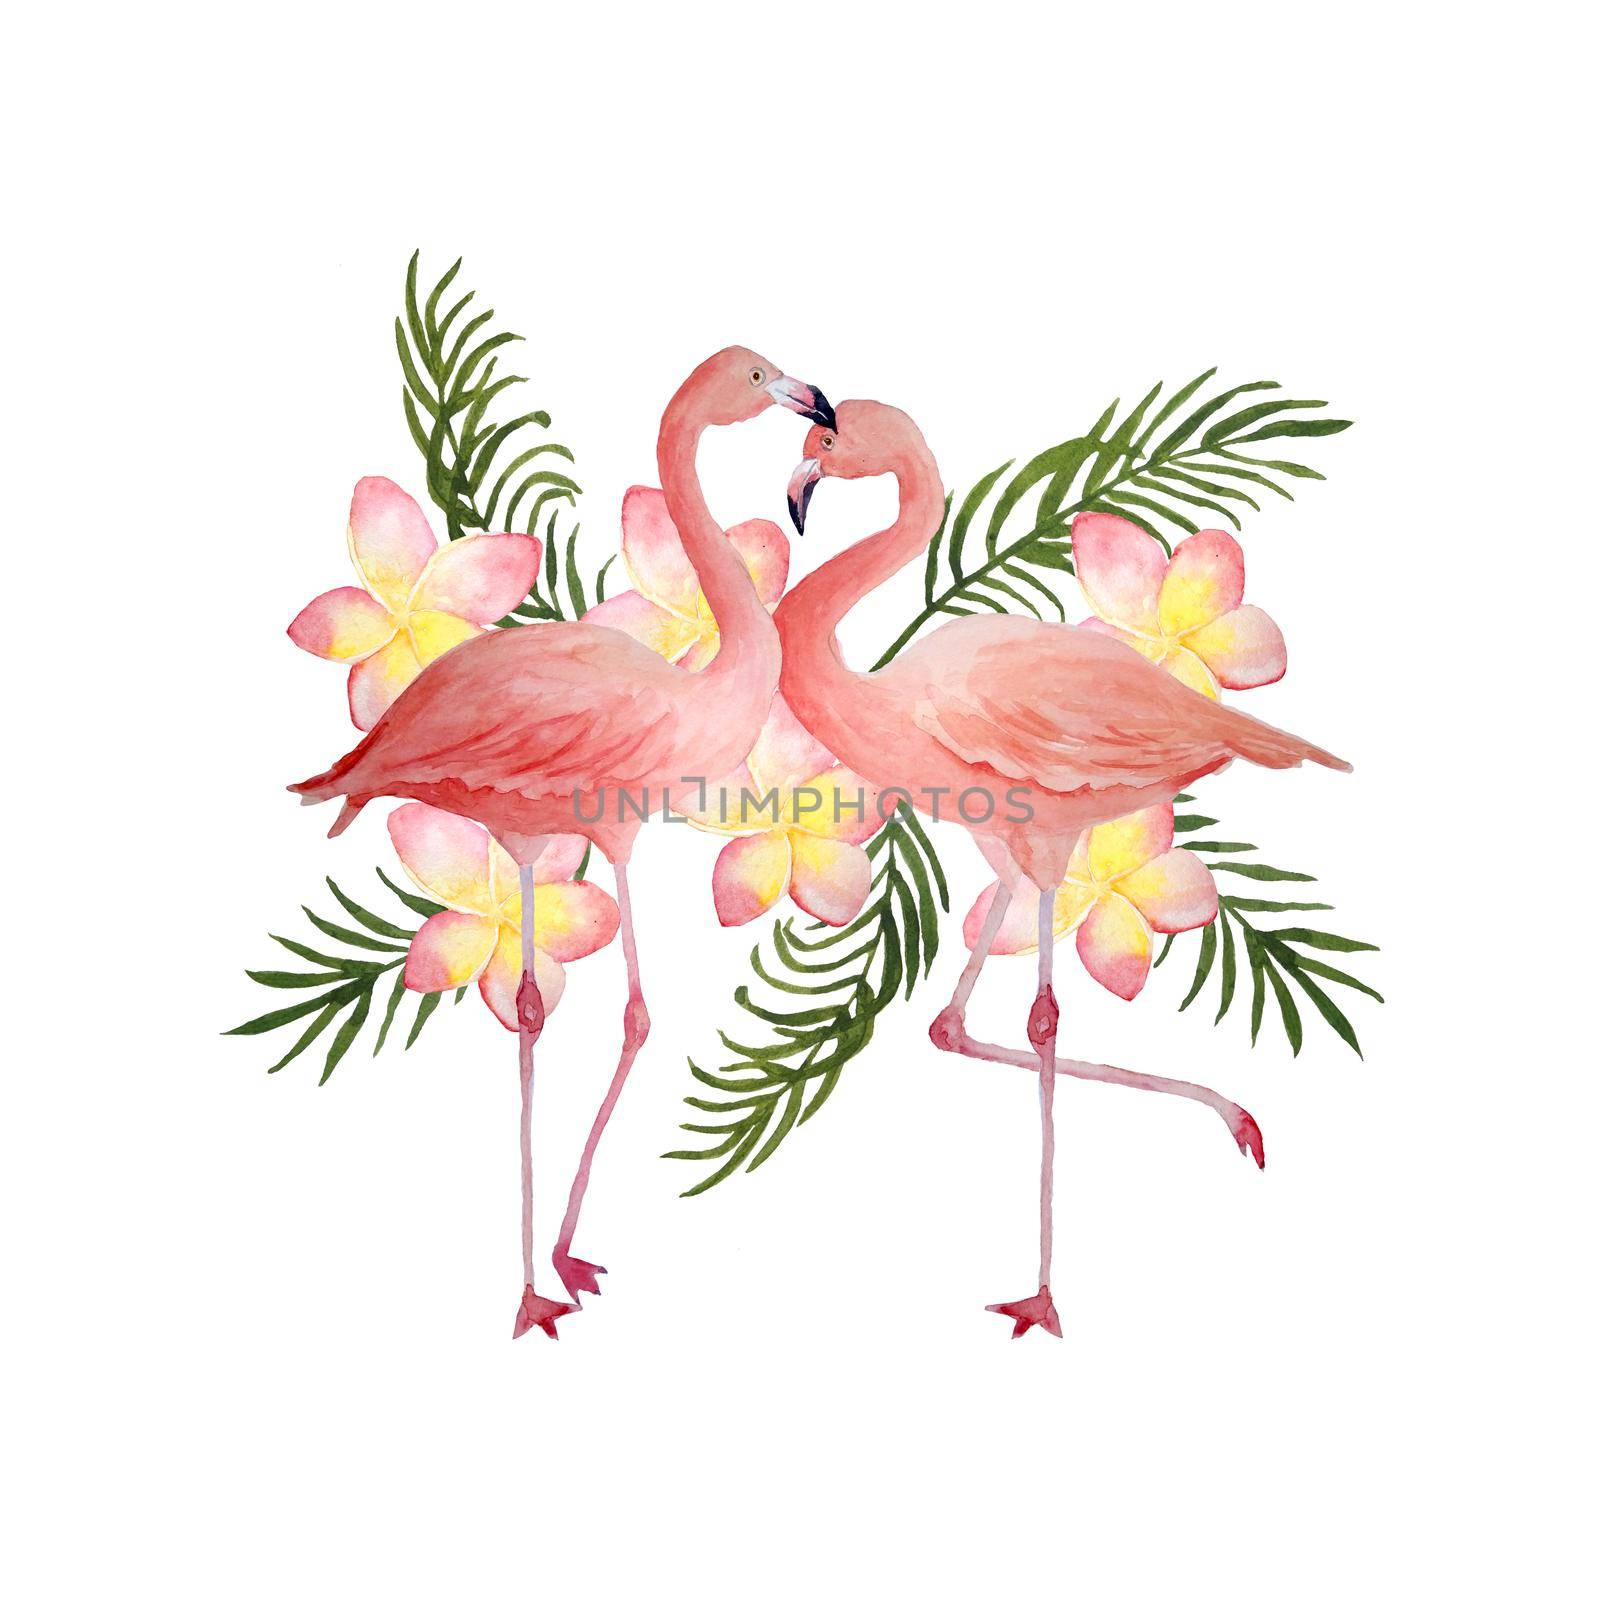 Two pink flamingo, romantic couple in love with palm leaves plumeria frangipani flowers. Tropical exotic bird rose flamingos. Watercolor hand drawn realistic animal illustration. Wedding cards invitation st valentine day. by Lagmar